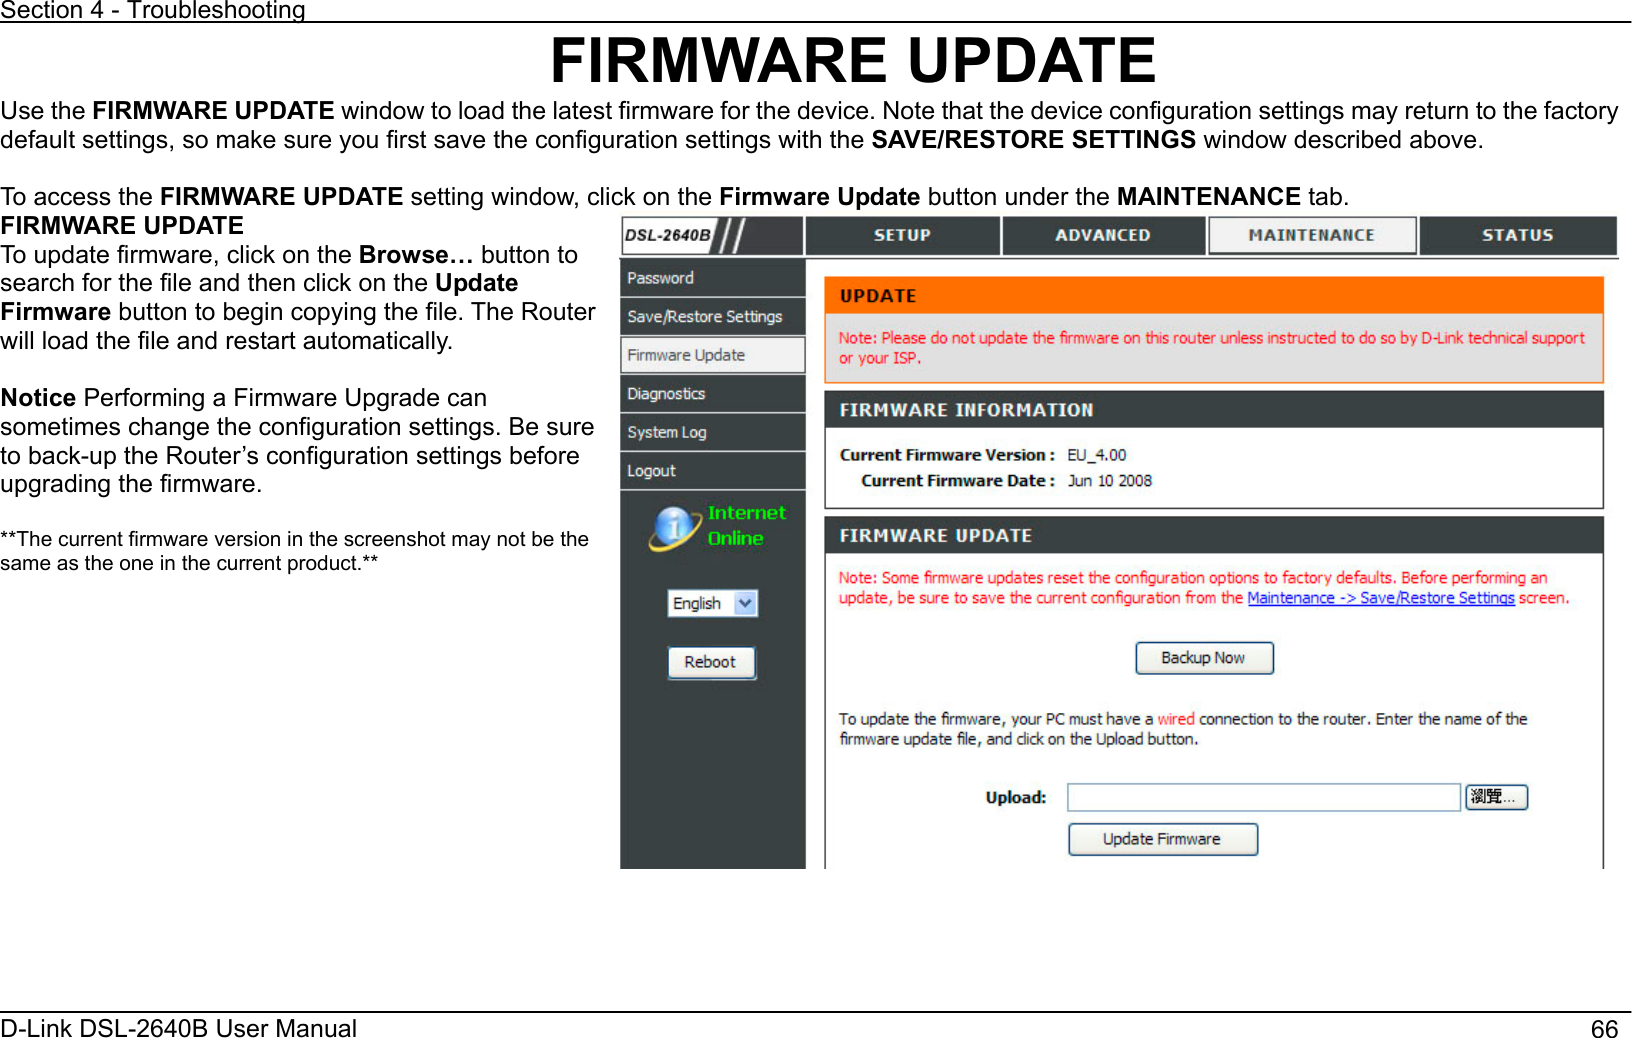 Section 4 - Troubleshooting D-Link DSL-2640B User Manual                                       66FIRMWARE UPDATE Use the FIRMWARE UPDATE window to load the latest firmware for the device. Note that the device configuration settings may return to the factory default settings, so make sure you first save the configuration settings with the SAVE/RESTORE SETTINGS window described above.   To access the FIRMWARE UPDATE setting window, click on the Firmware Update button under the MAINTENANCE tab. FIRMWARE UPDATE To update firmware, click on the Browse… button to search for the file and then click on the Update Firmware button to begin copying the file. The Router will load the file and restart automatically. Notice Performing a Firmware Upgrade can sometimes change the configuration settings. Be sure to back-up the Router’s configuration settings before upgrading the firmware.   **The current firmware version in the screenshot may not be the same as the one in the current product.** 